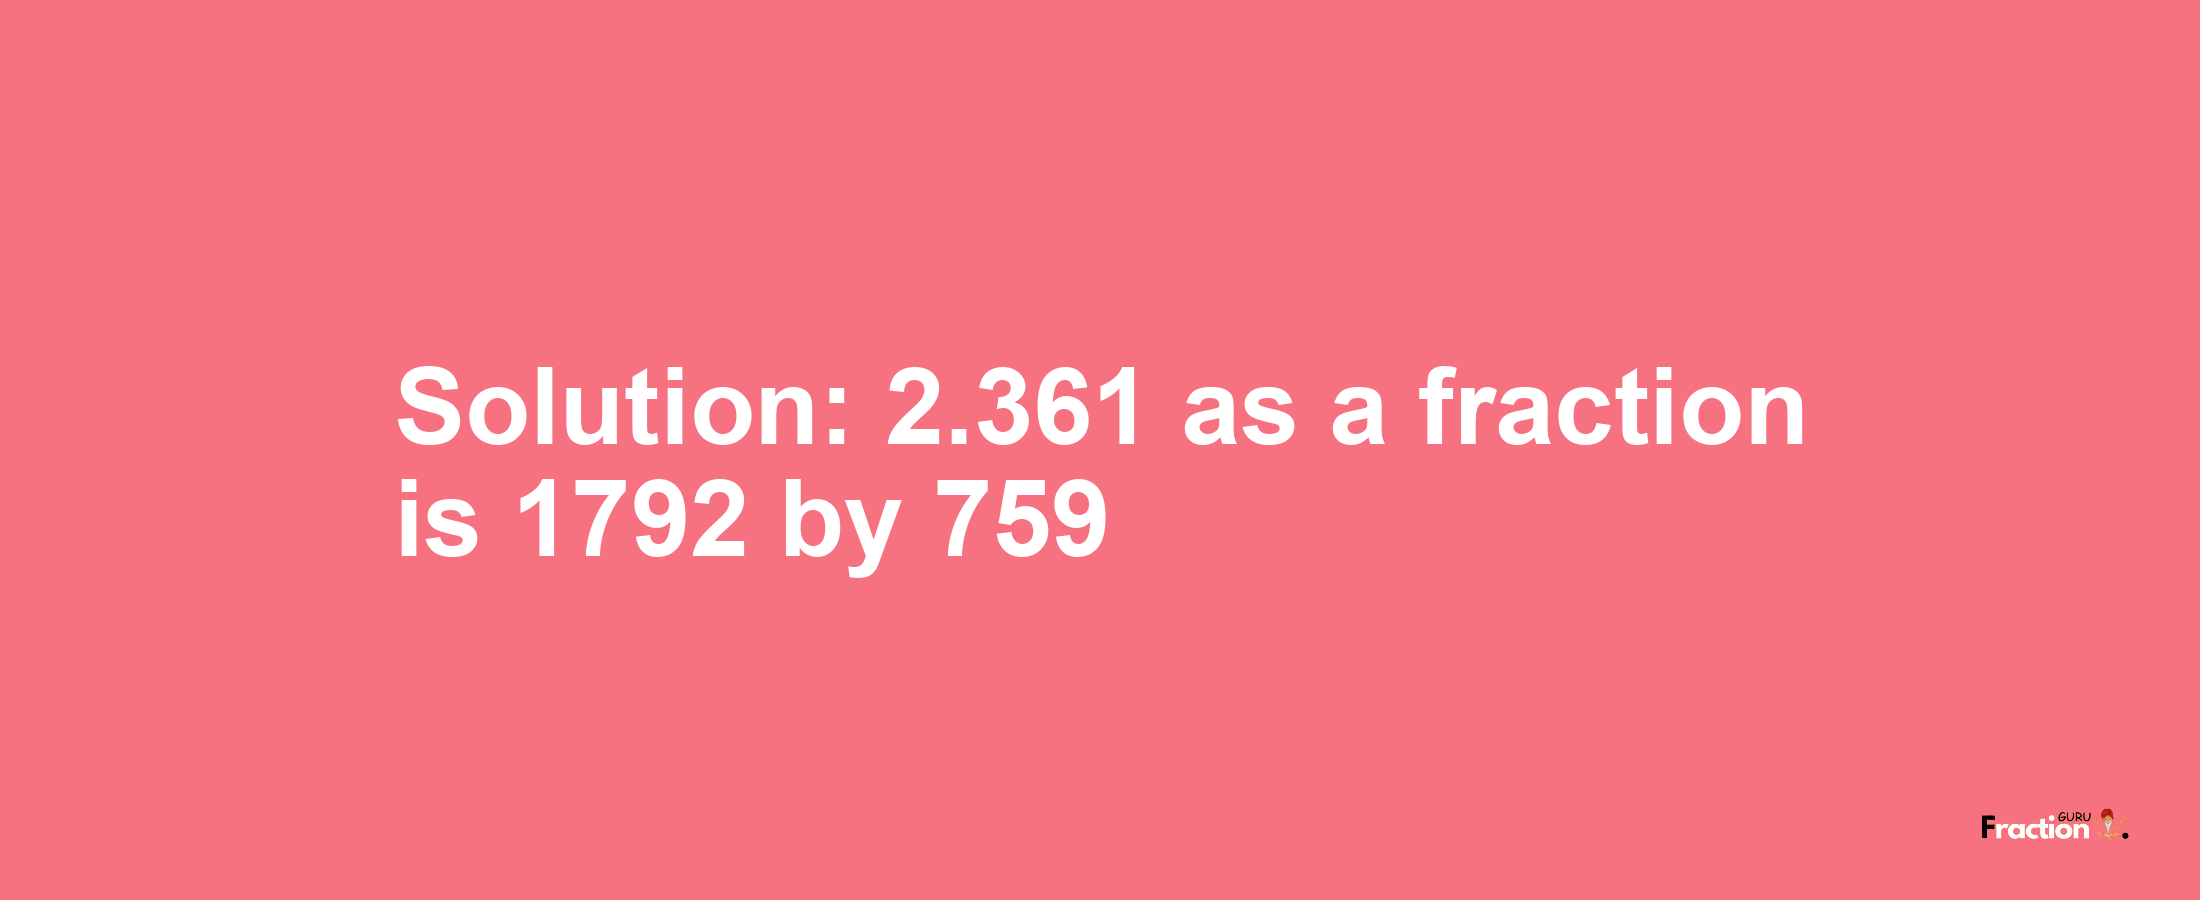 Solution:2.361 as a fraction is 1792/759